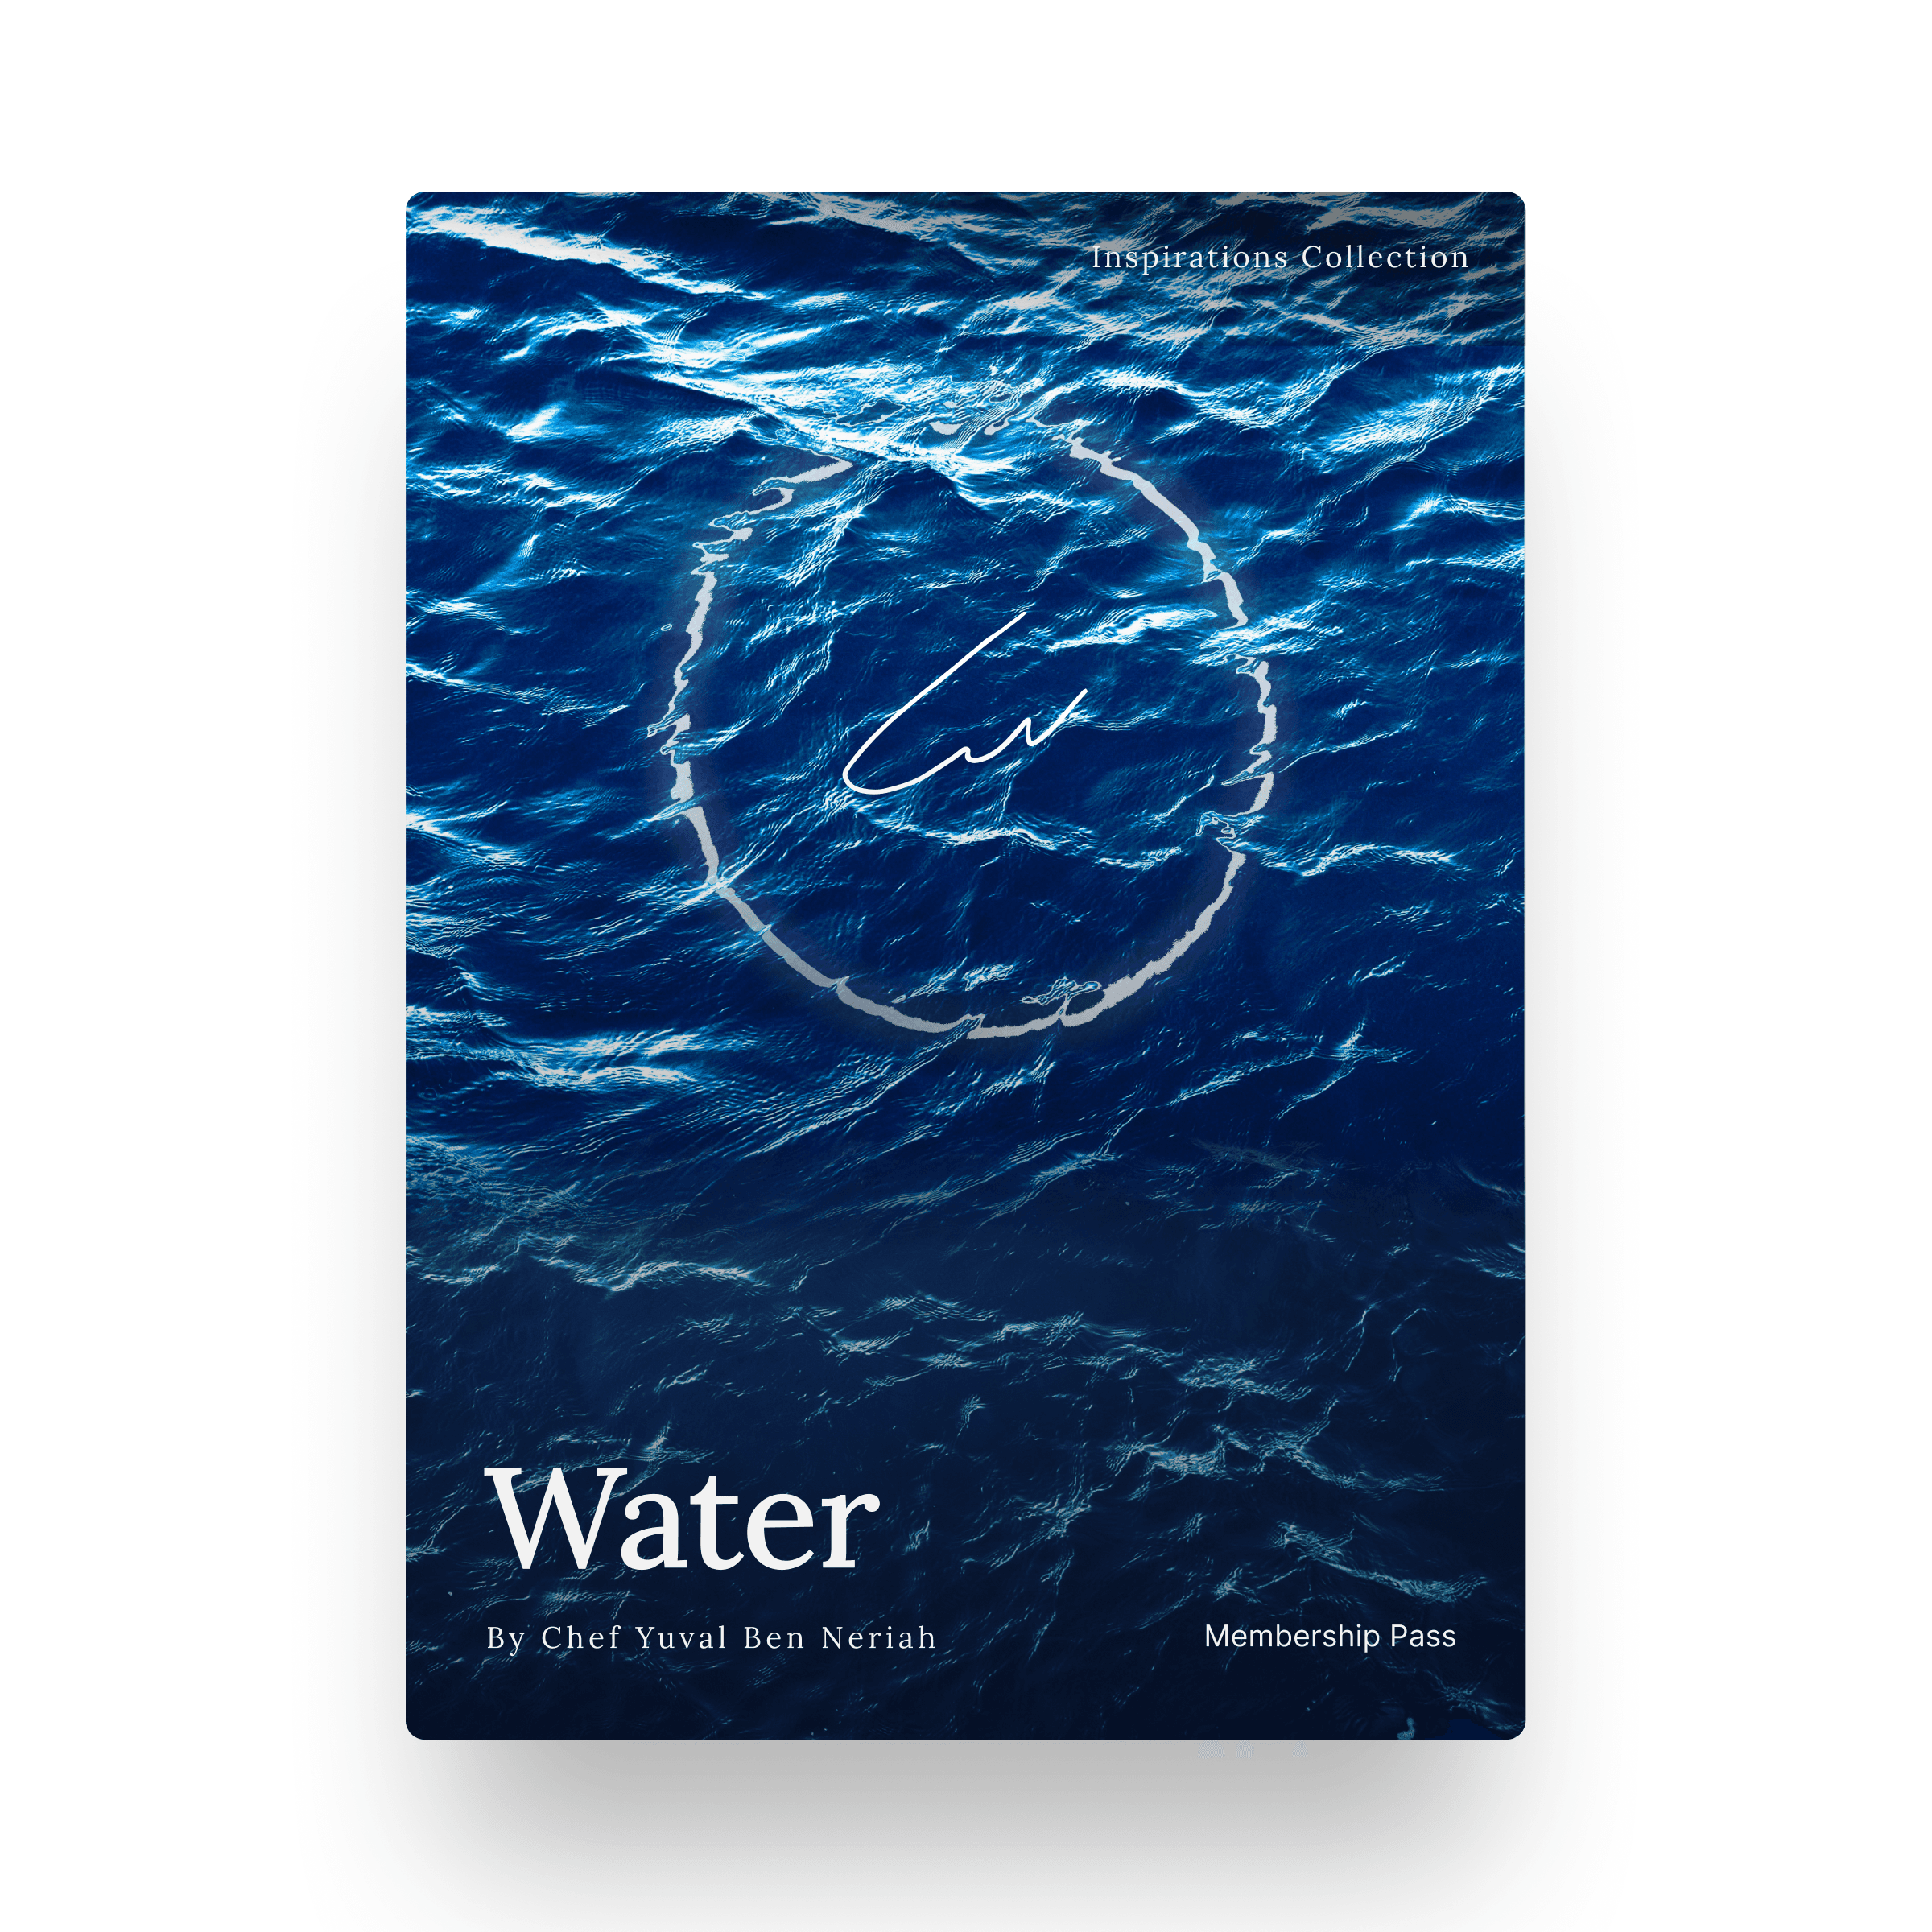 Water by Chef Yuval Ben Neriah